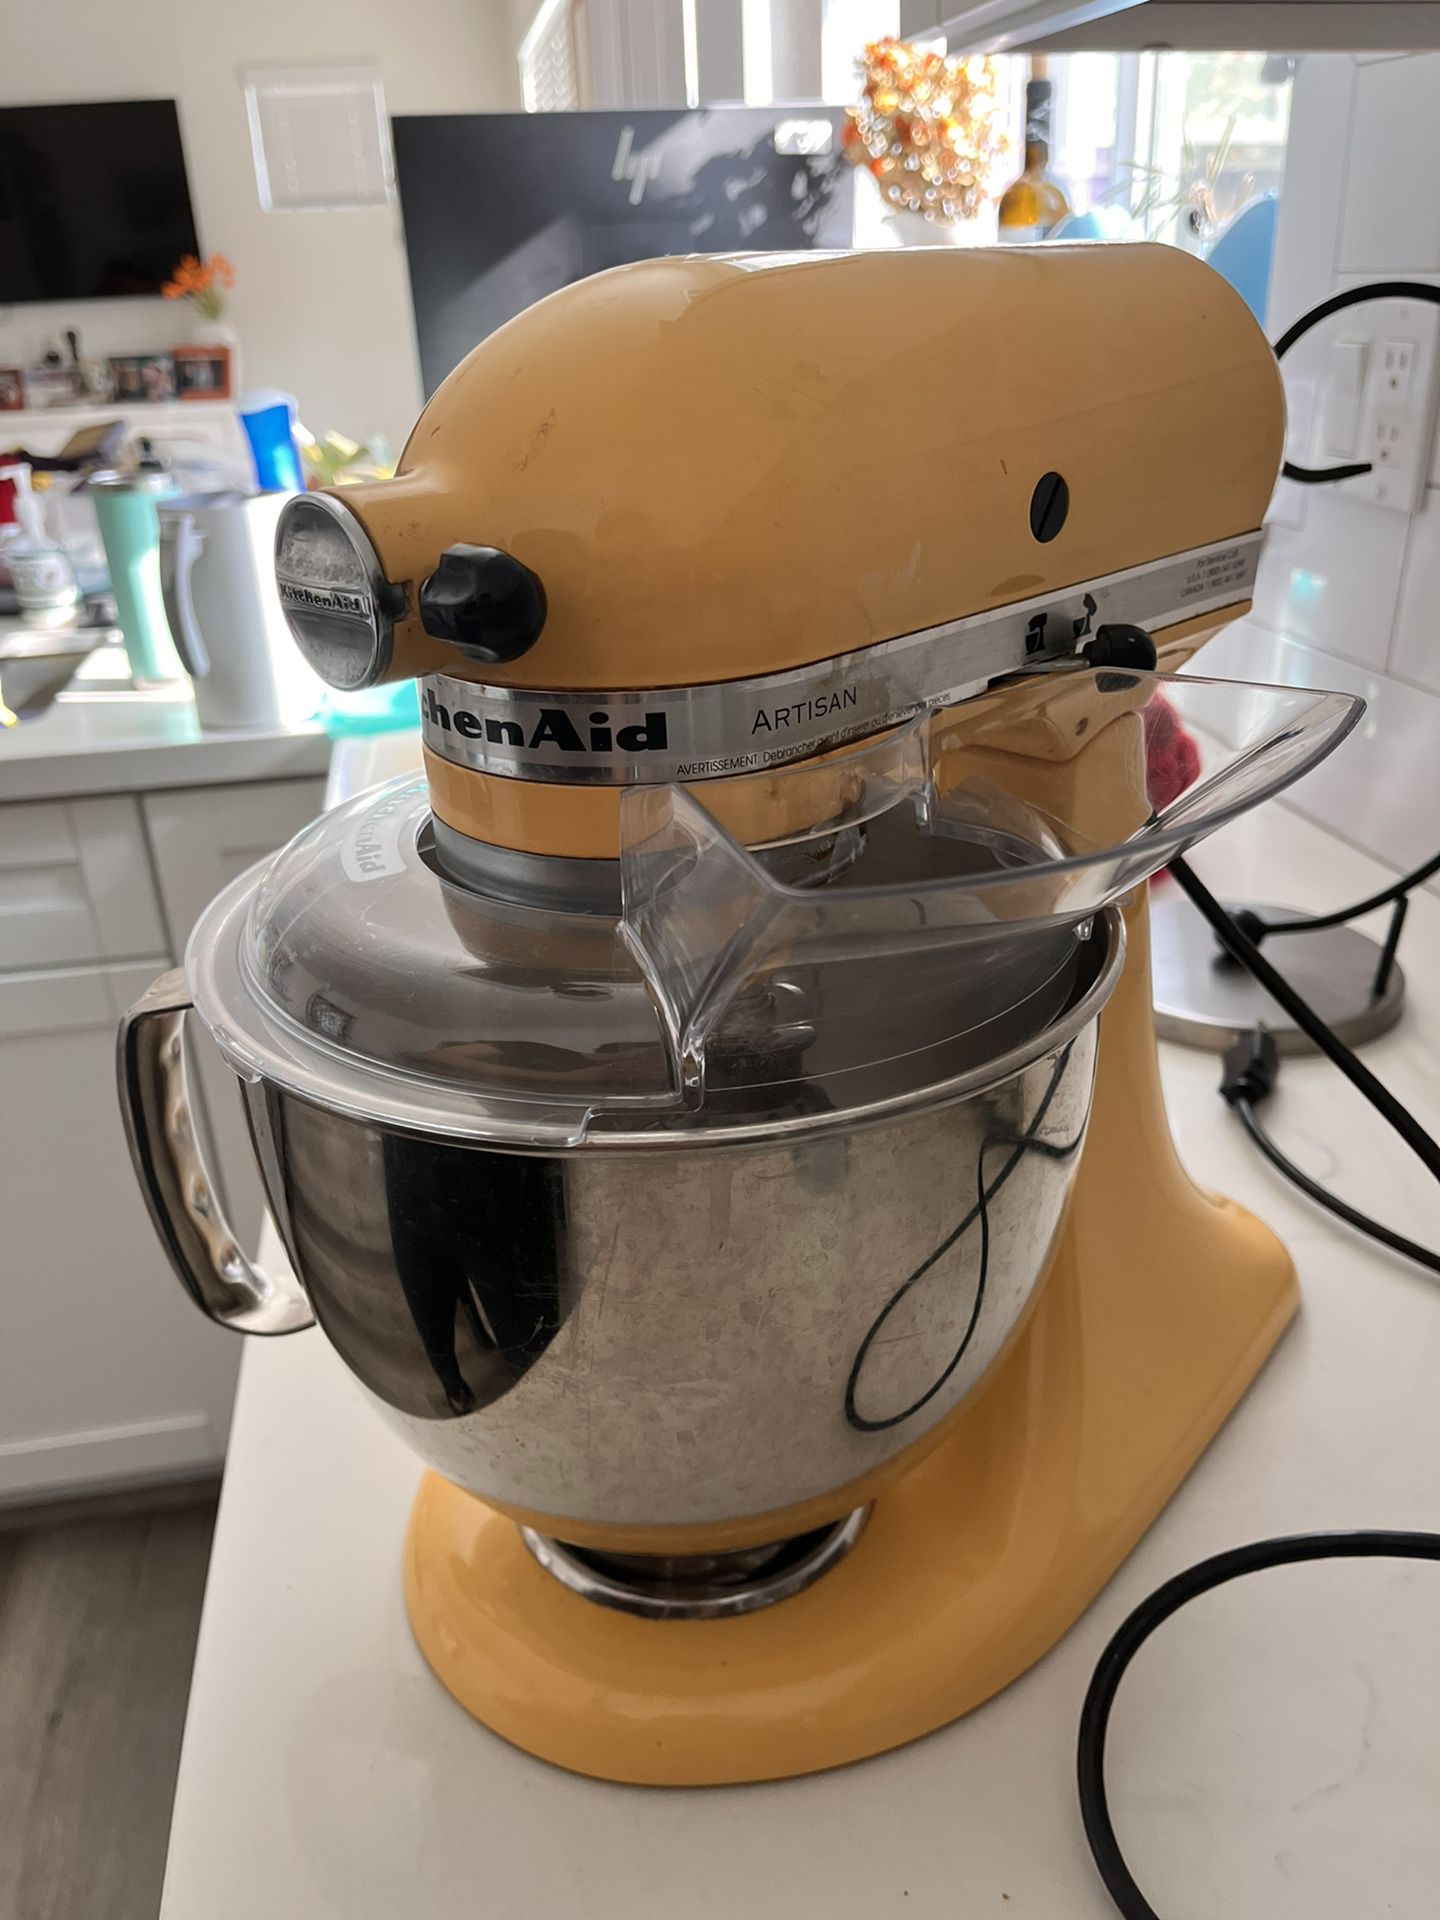 KitchenAid 8-Quart Commercial Stand Mixer for Sale in San Leandro, CA -  OfferUp